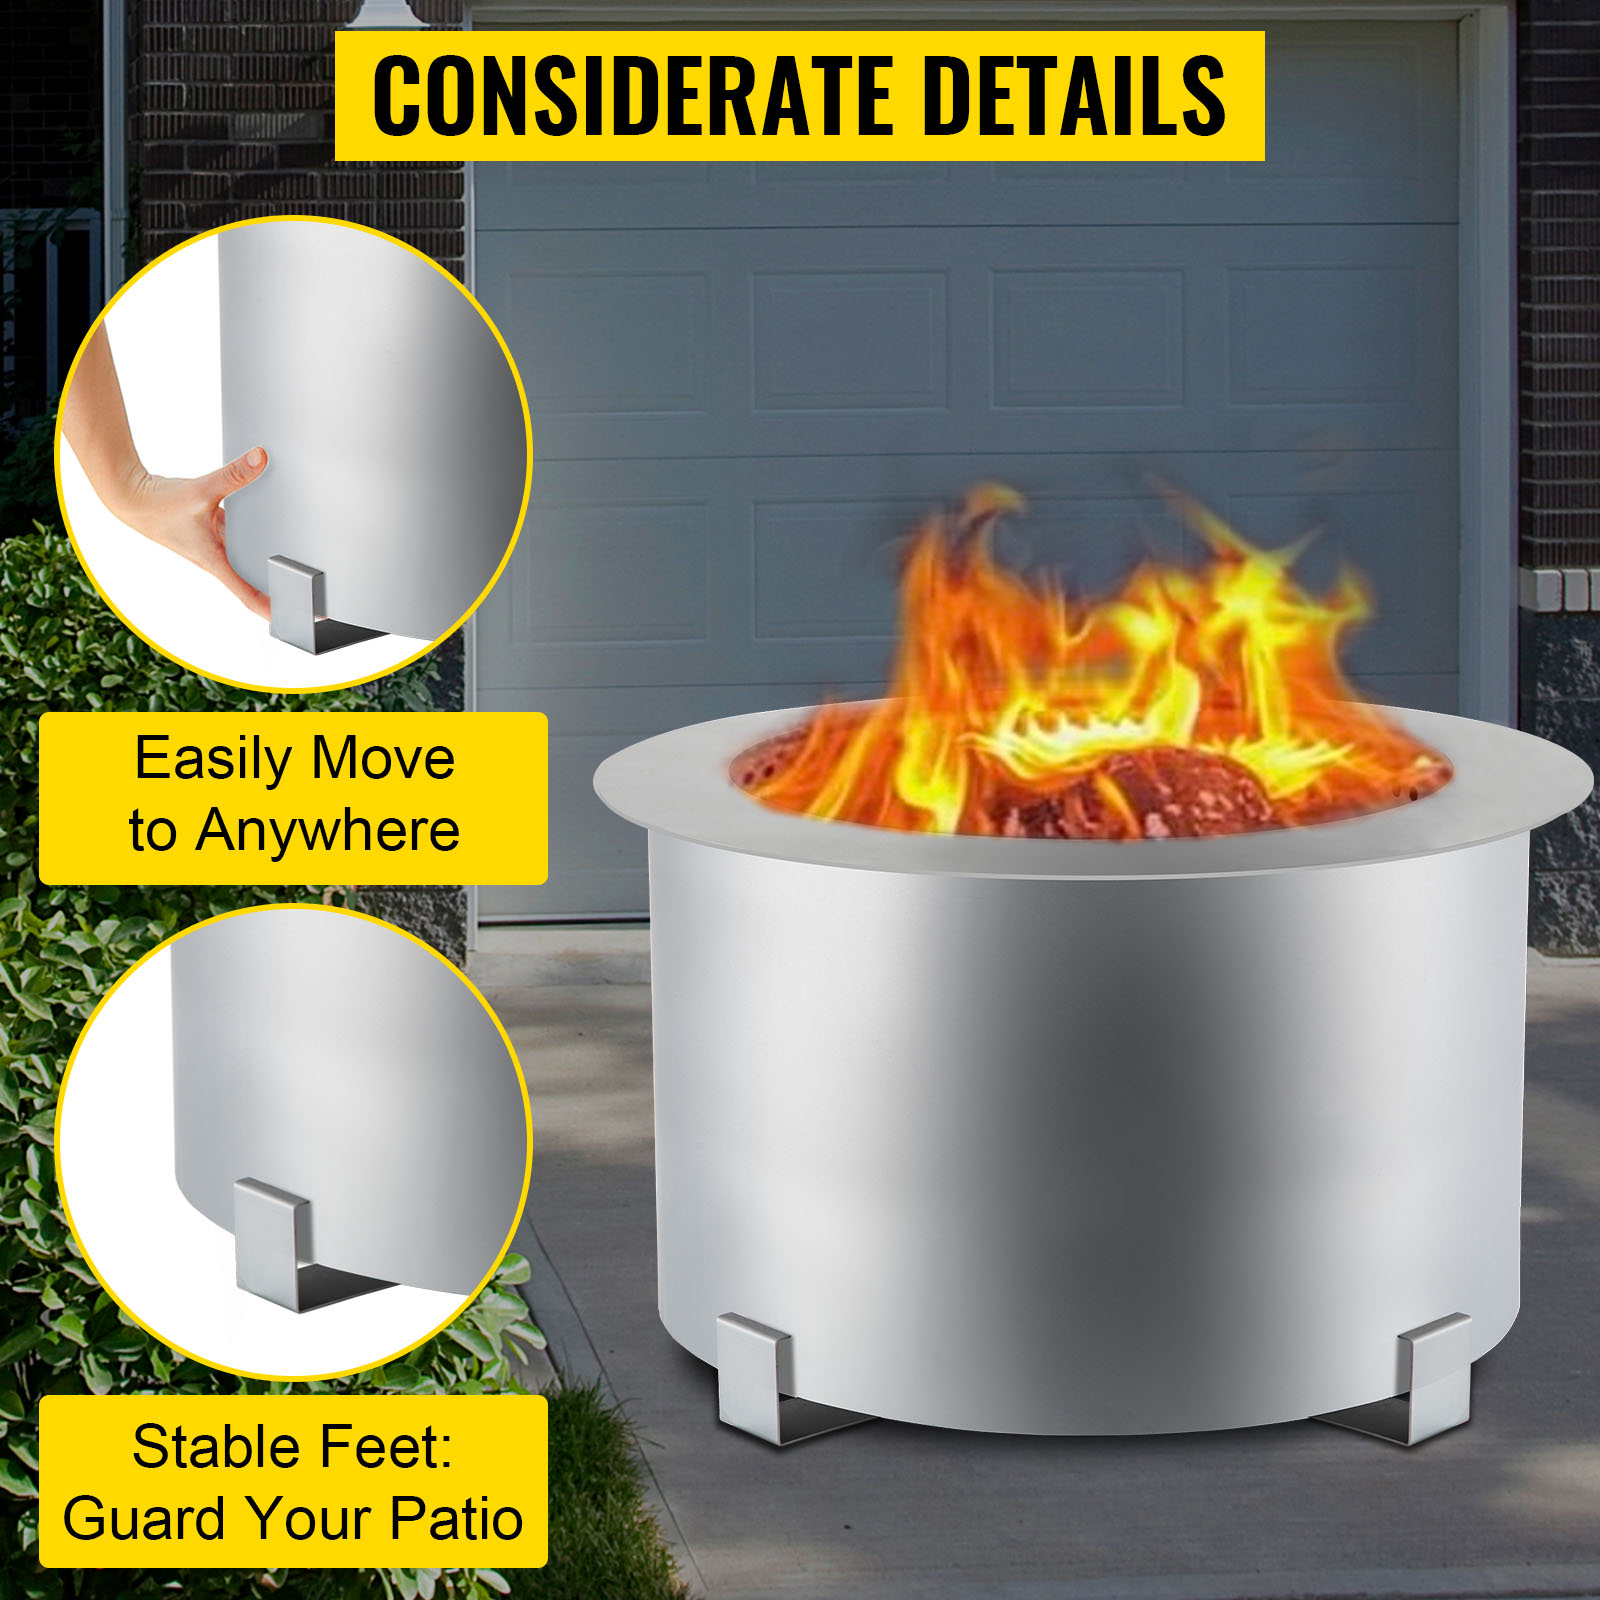 Fire Pit Stove Bonfire,Stainless Steel,Smokeless